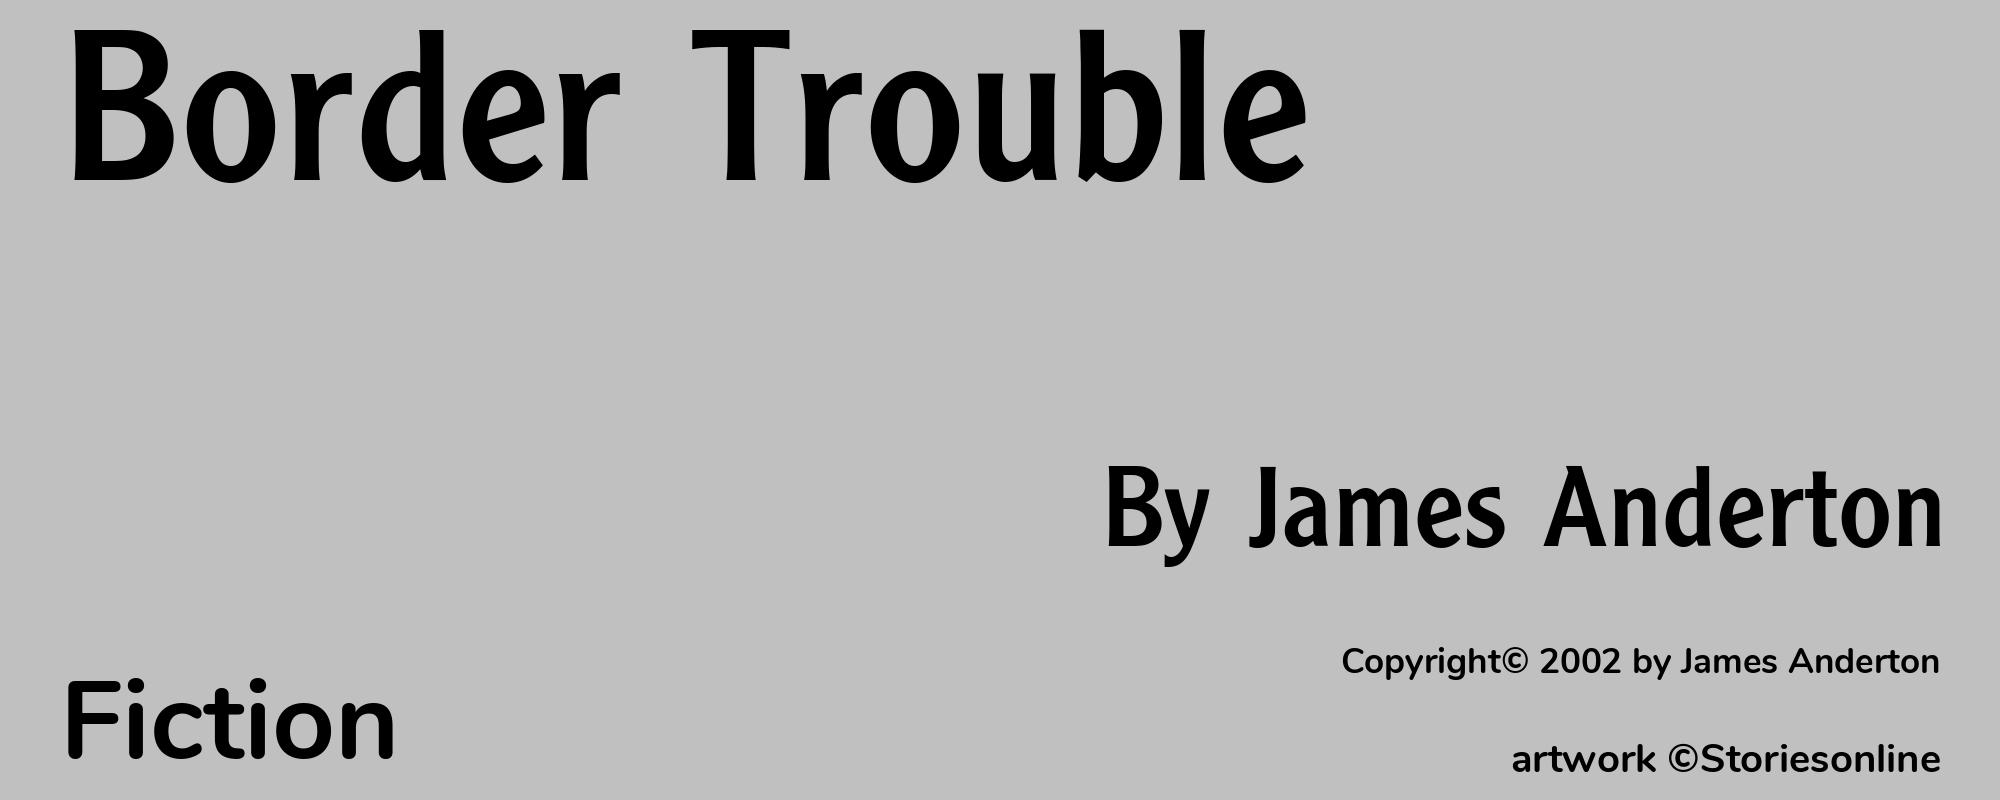 Border Trouble - Cover